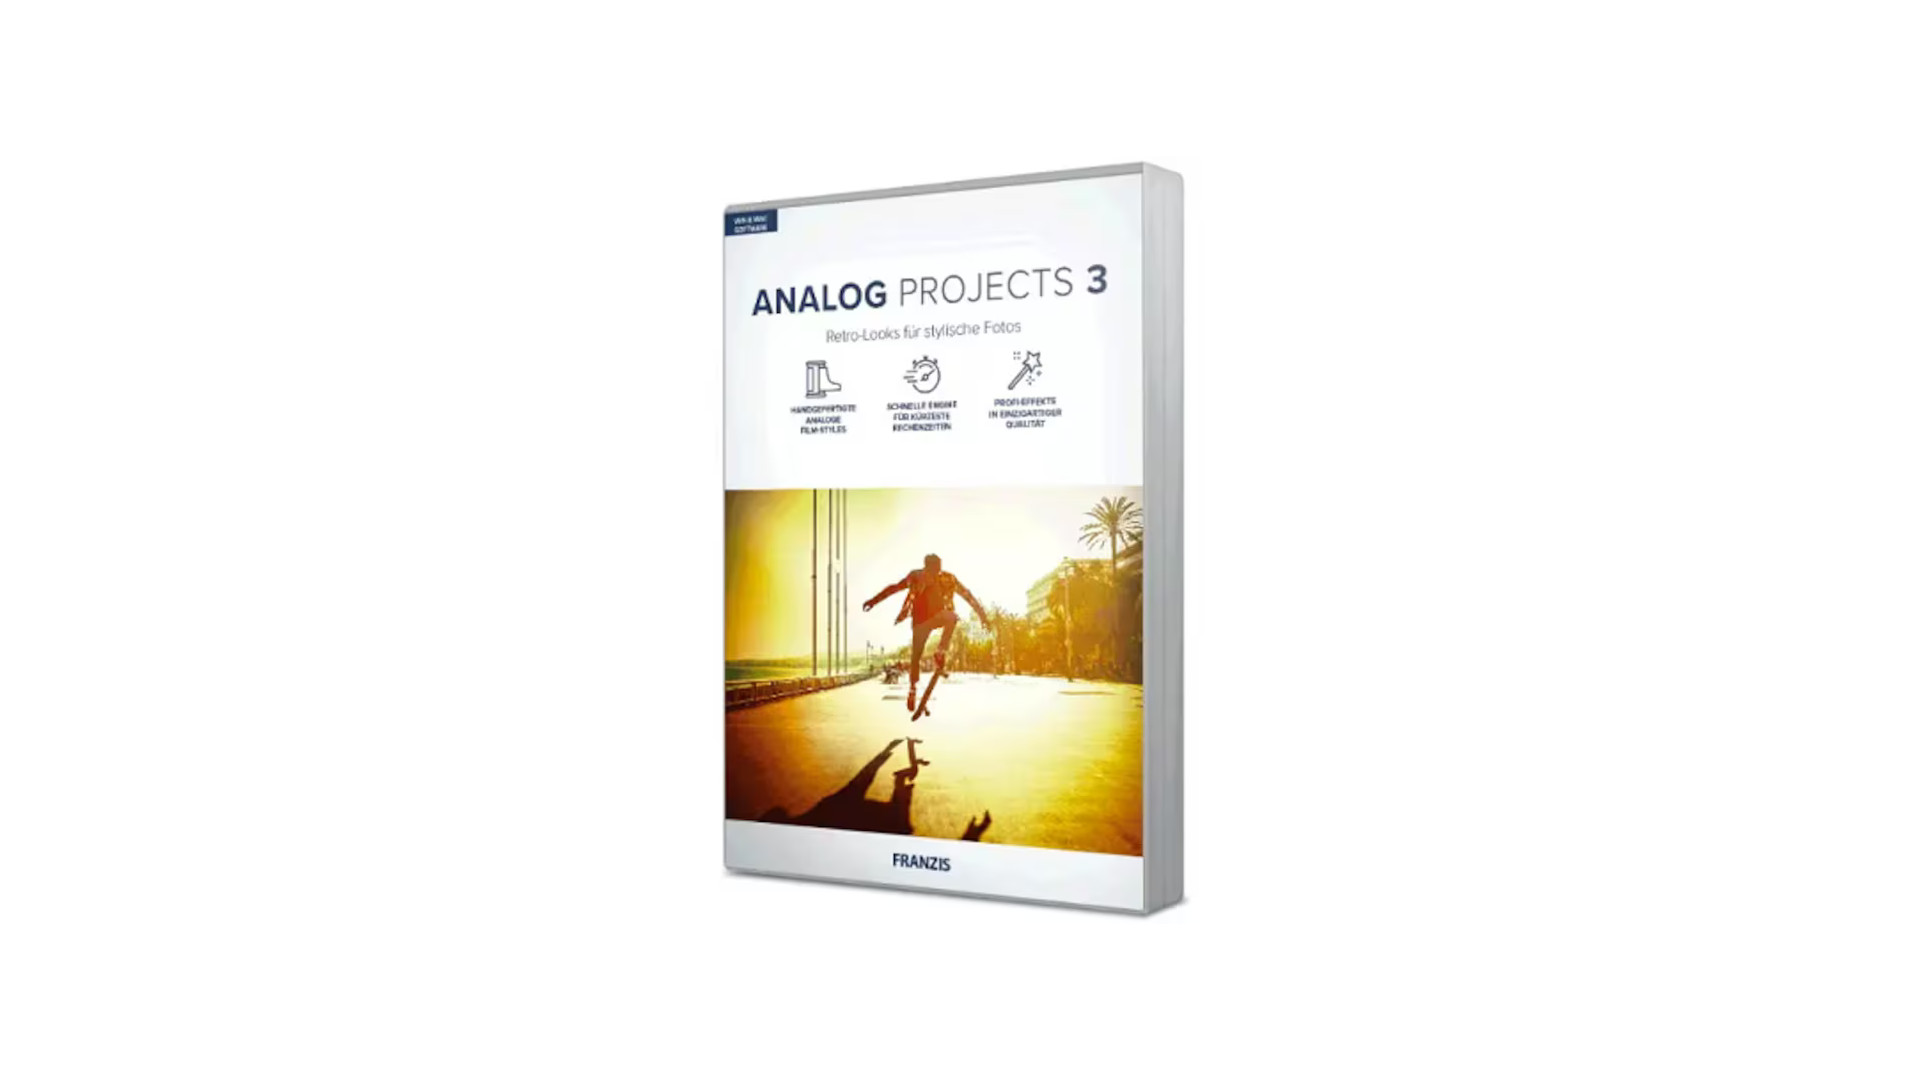 ANALOG projects 3 - Project Software Key (Lifetime / 1 PC), 33.89 usd